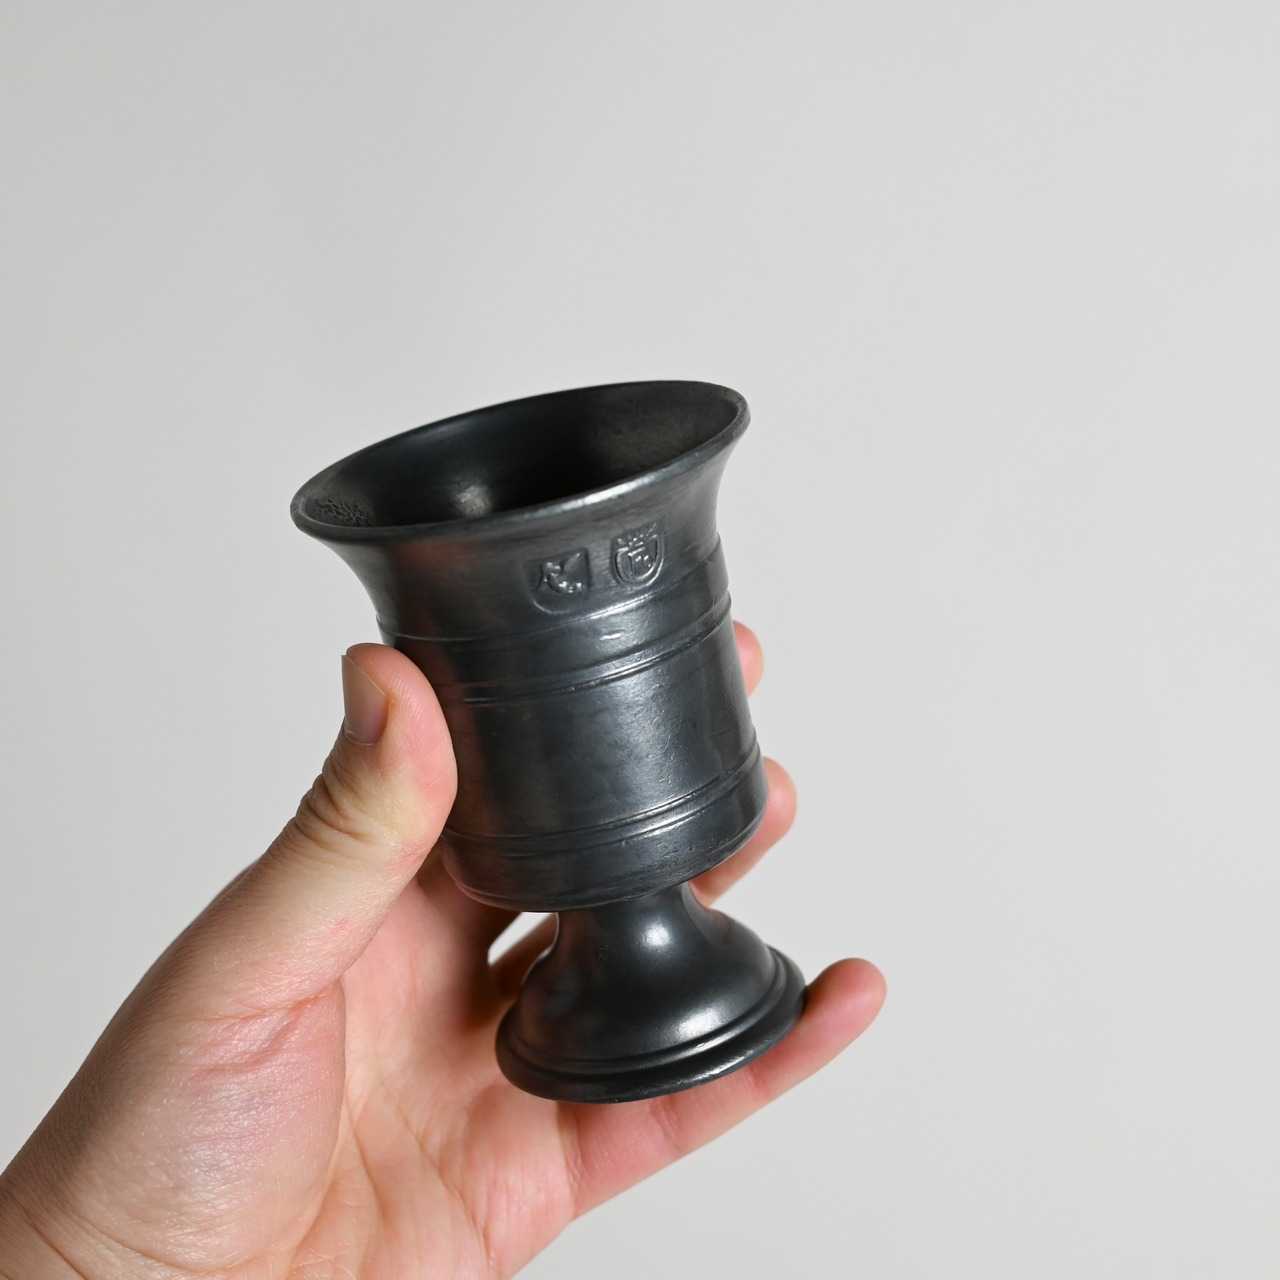 Pewter Cup / ピューター カップ〈 ピューター / ブロカント / 一輪挿し / アンティーク / ヴィンテージ 〉112848